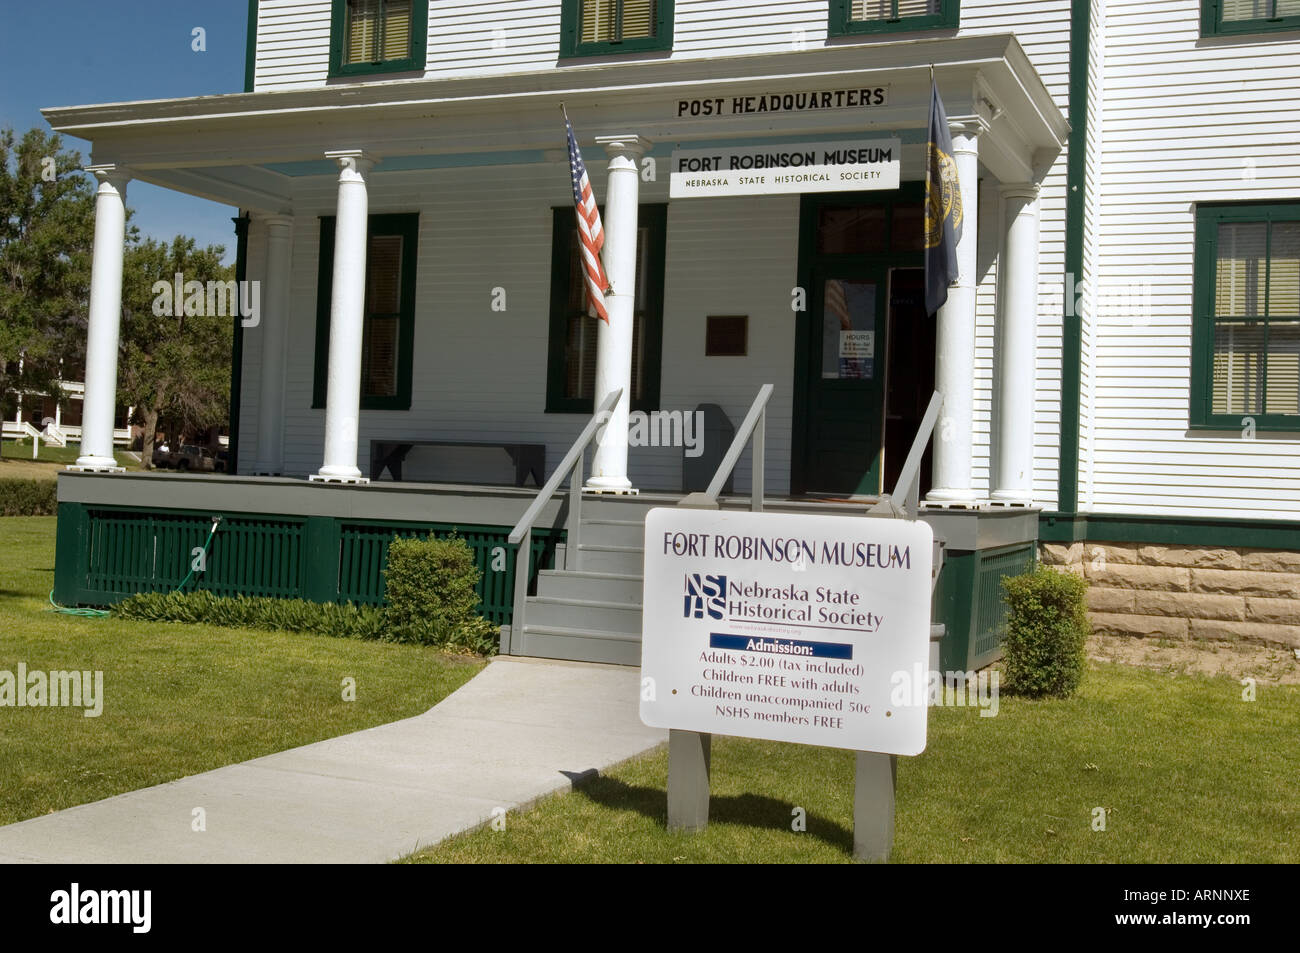 Post Headquarters and Fort Robinson Museum at Fort Robinson State Park in NW Nebraska Stock Photo